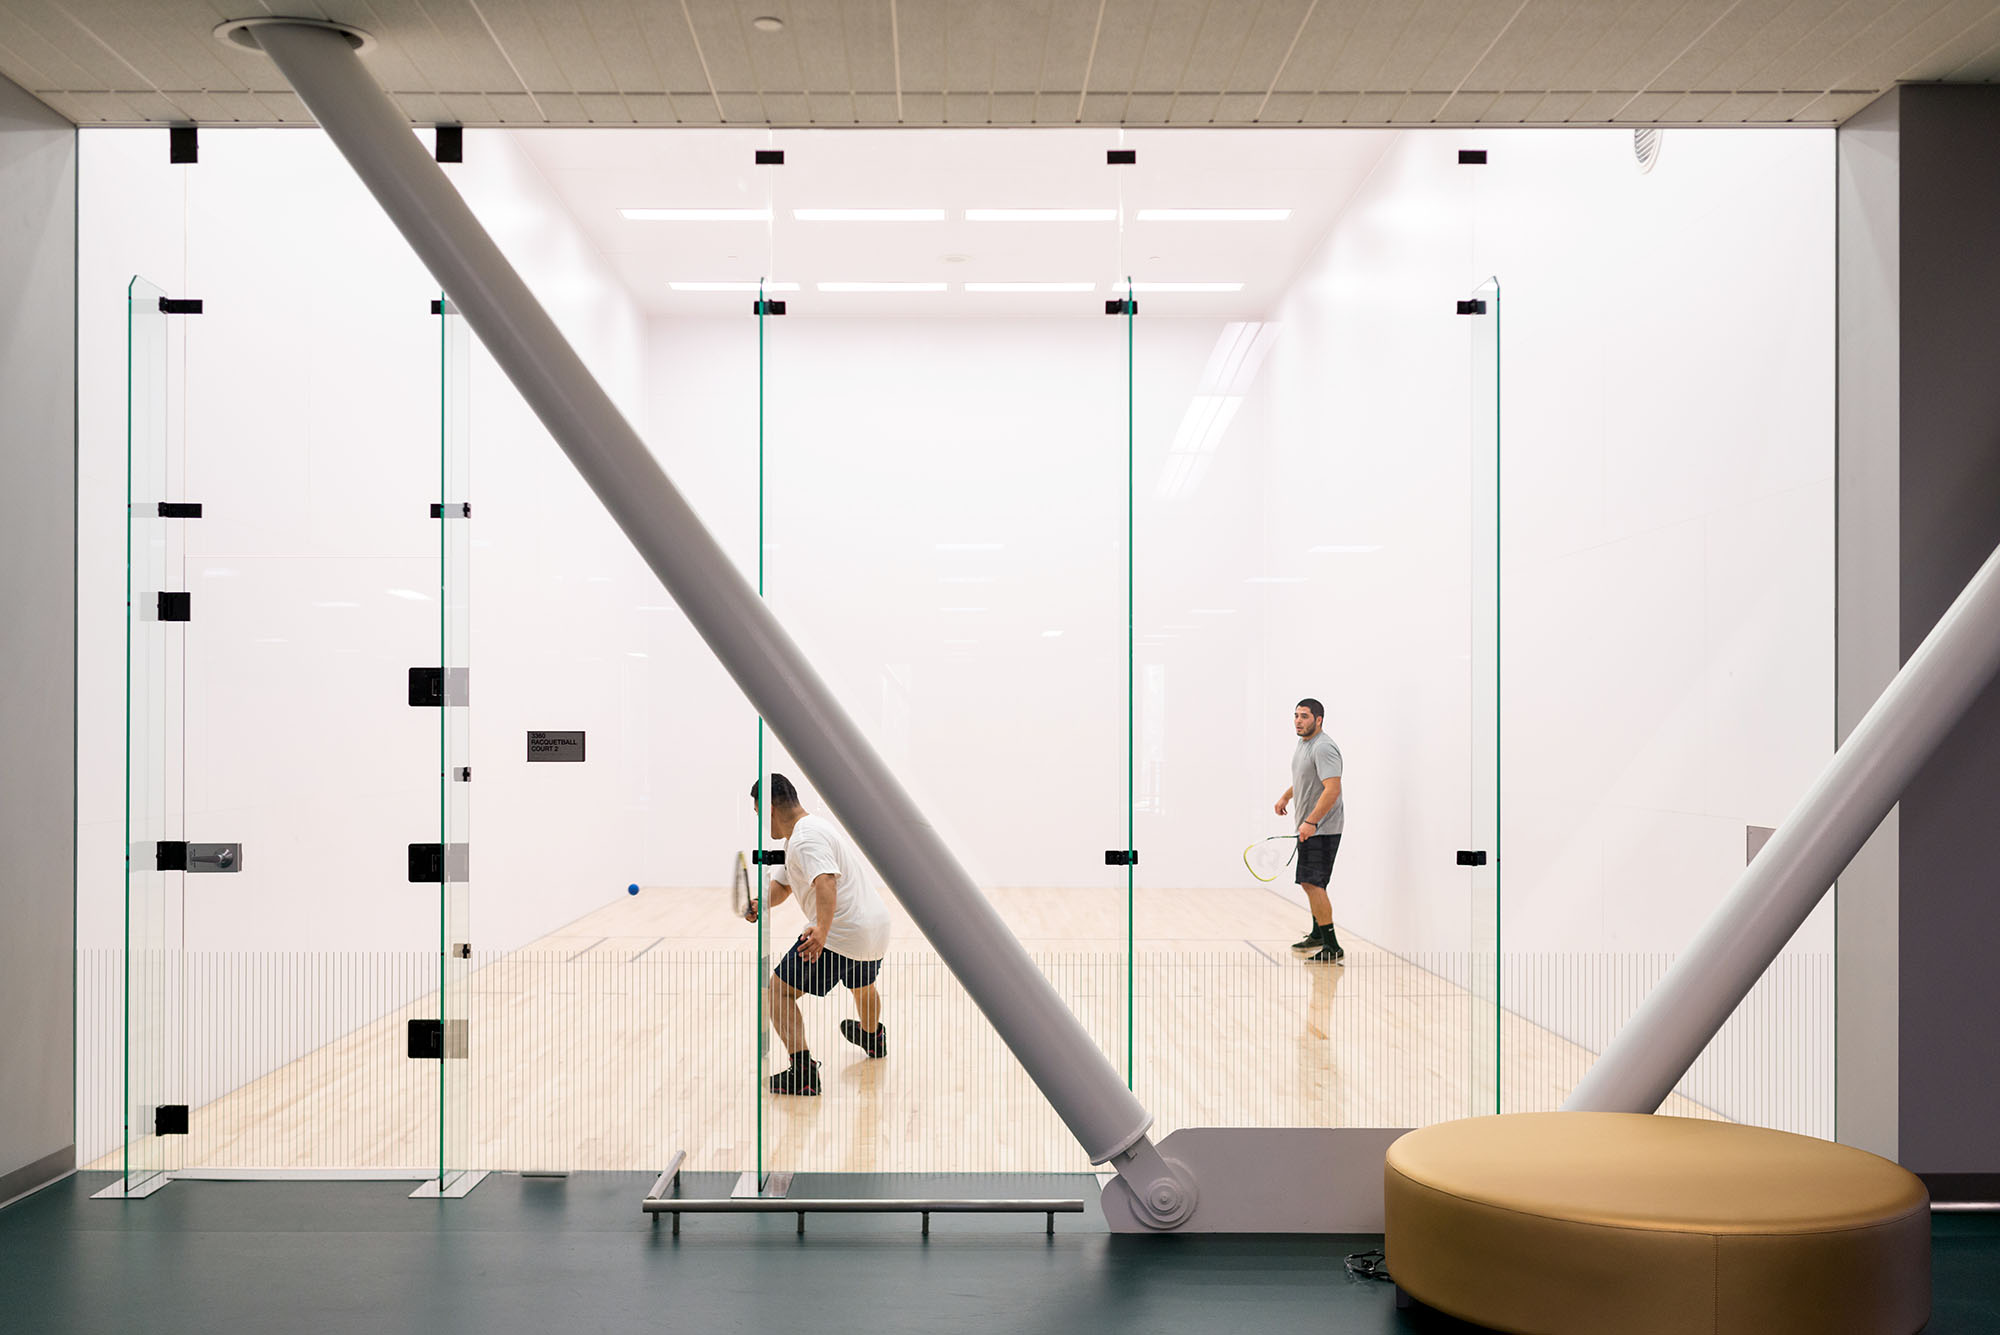 Two students playing in the racquetball court